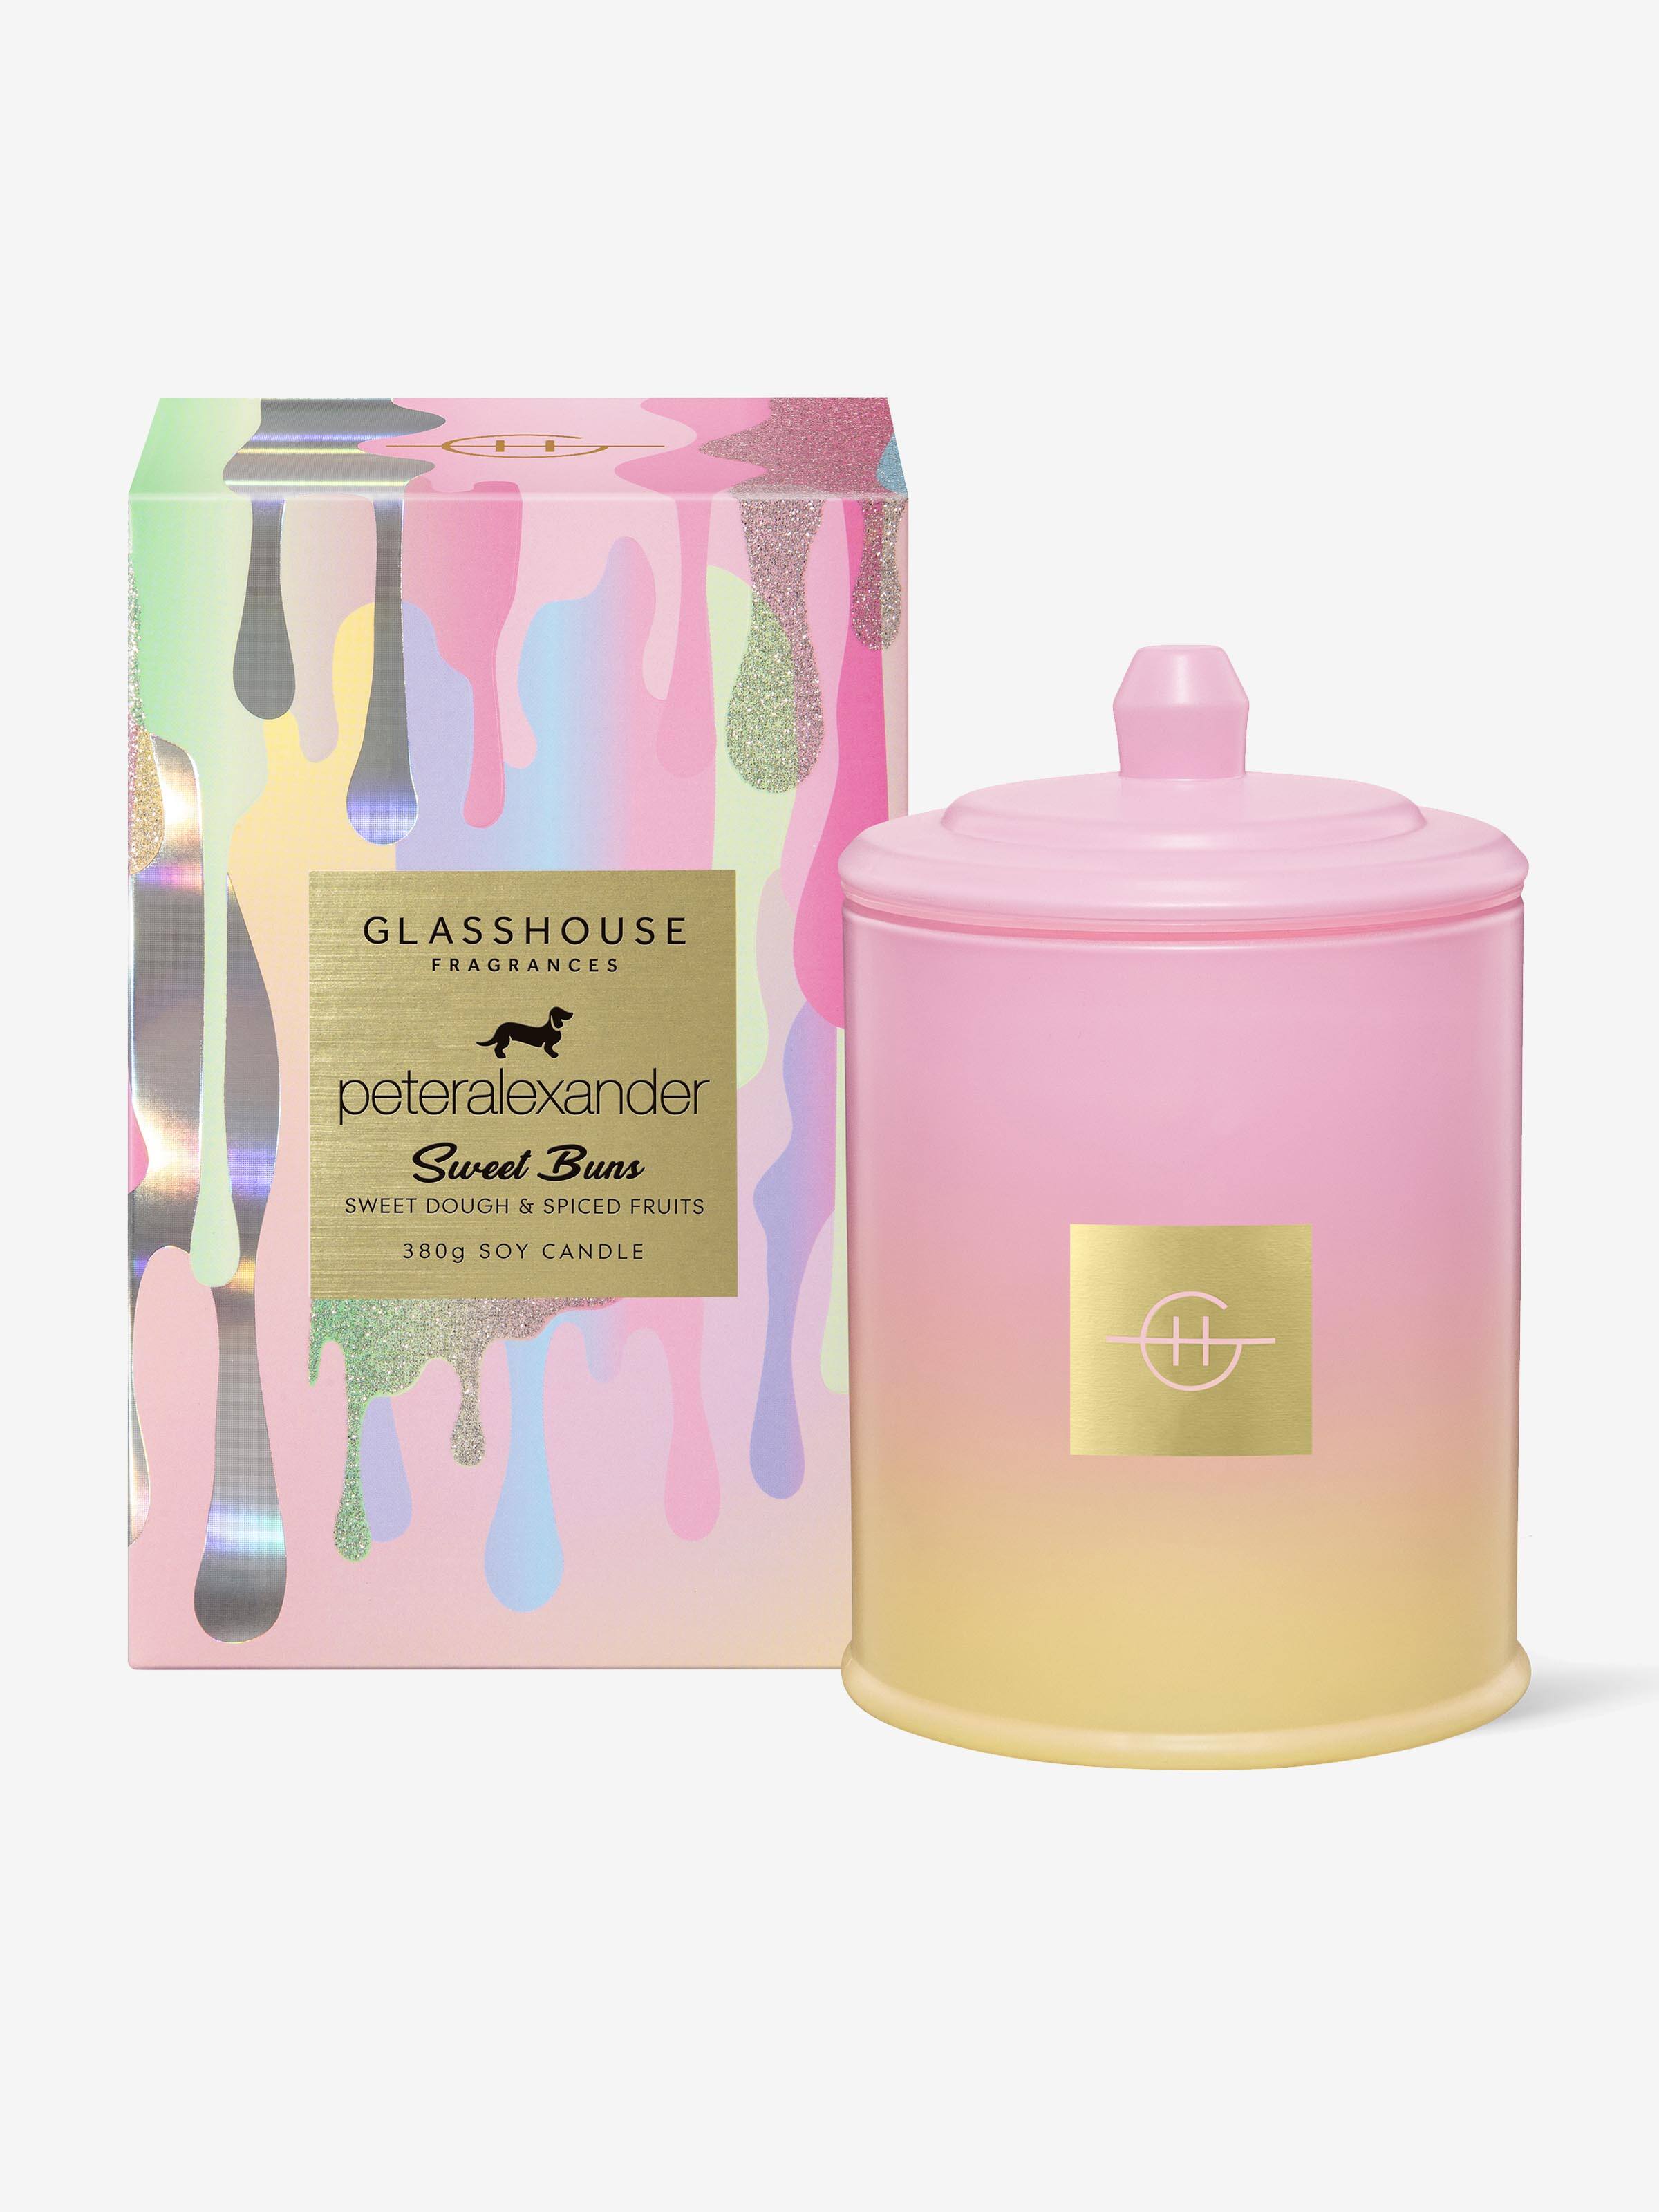 Glasshouse Fragrances Limited Edition Sweet Buns 380G Candle